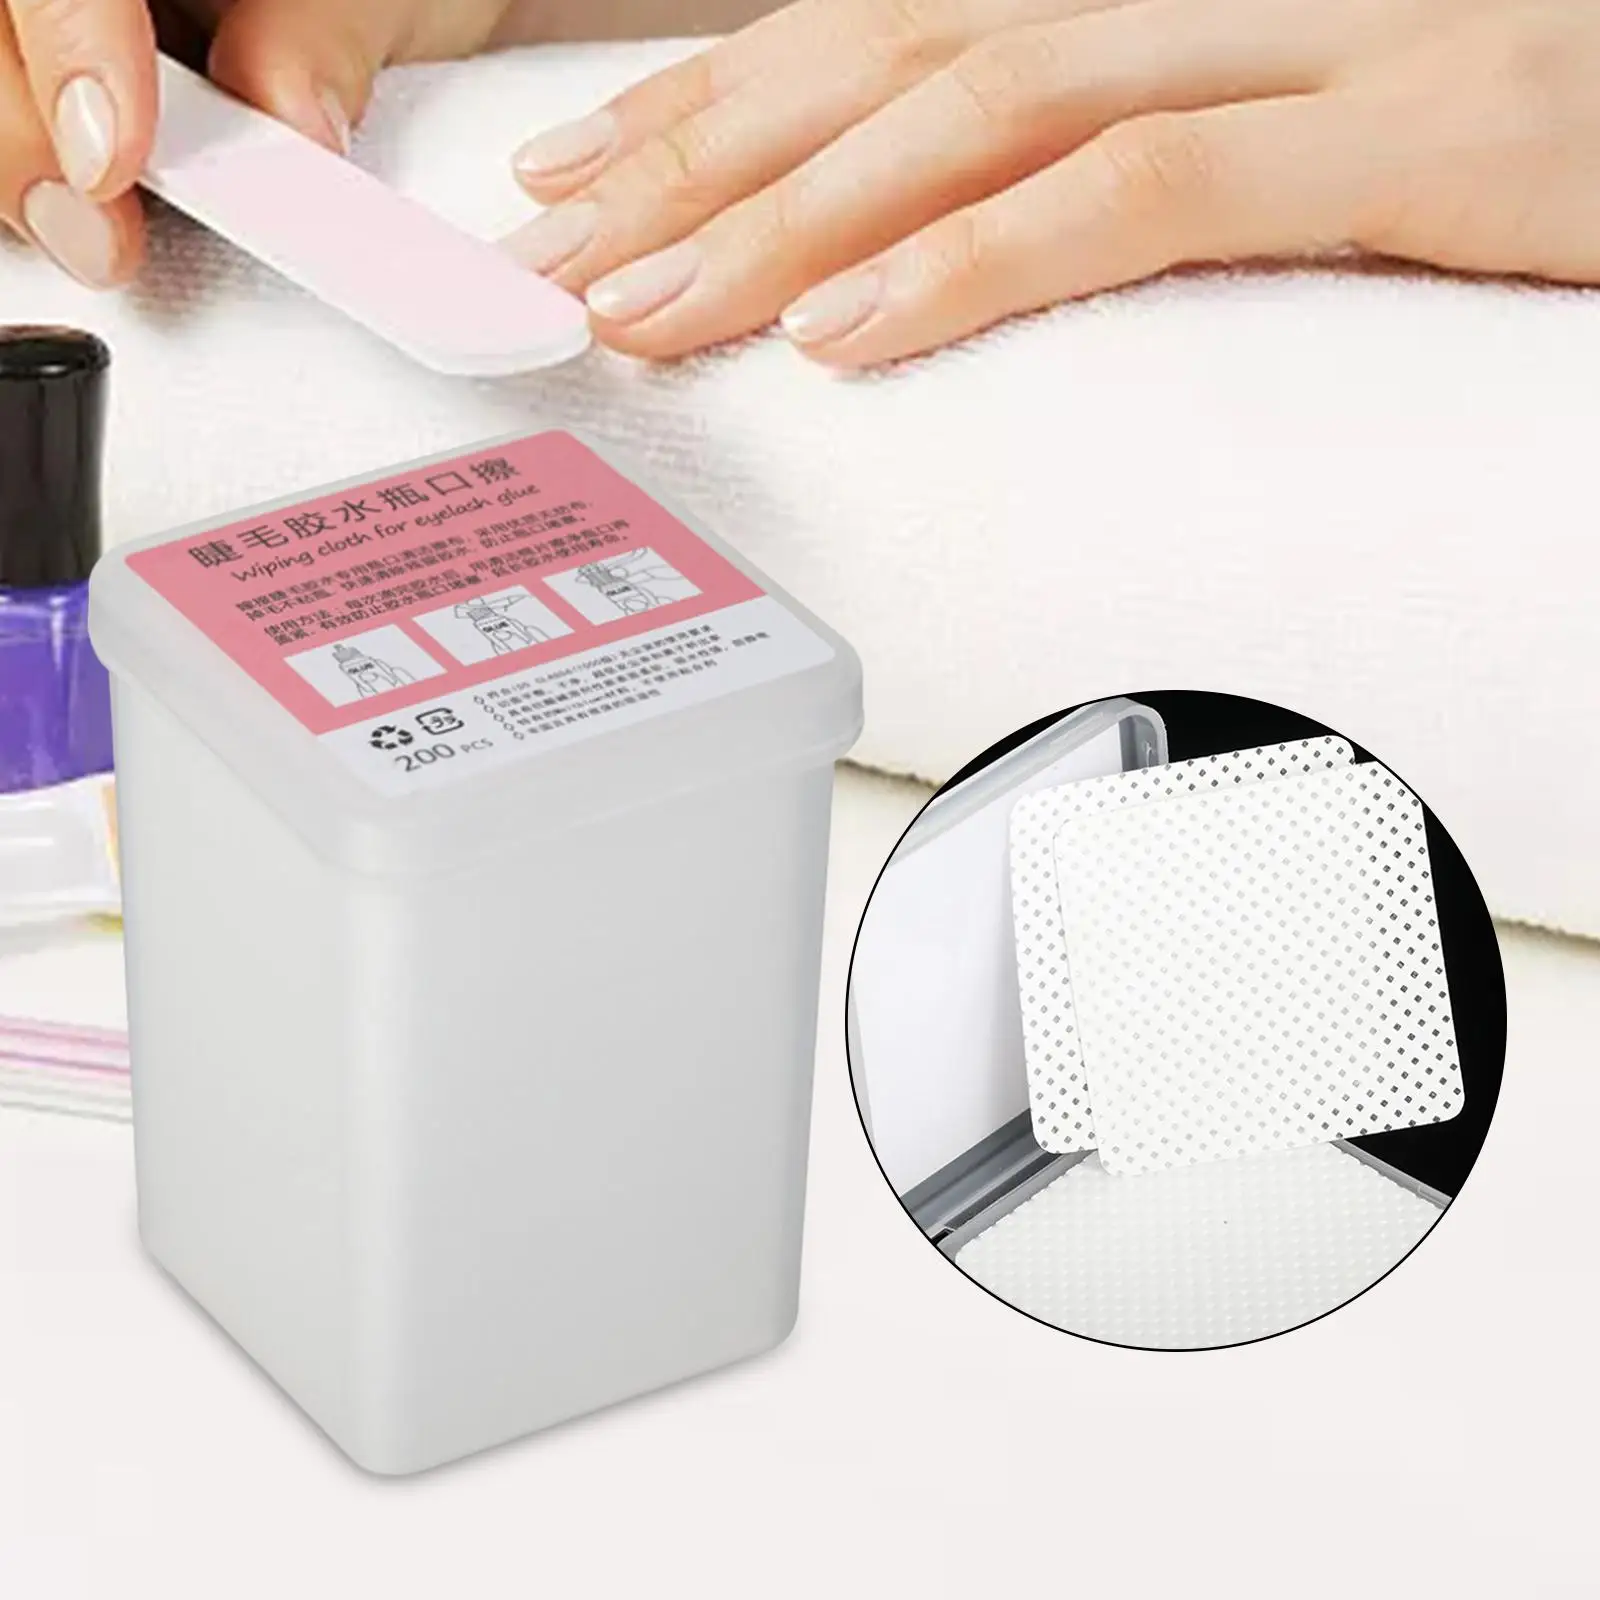 200x Lint Free Nail Wipes Cleaning Pad Cloth Eyelash Extension Glue Wipes Eyelash Glue Remover Wipes Home Salon Accessories Tool